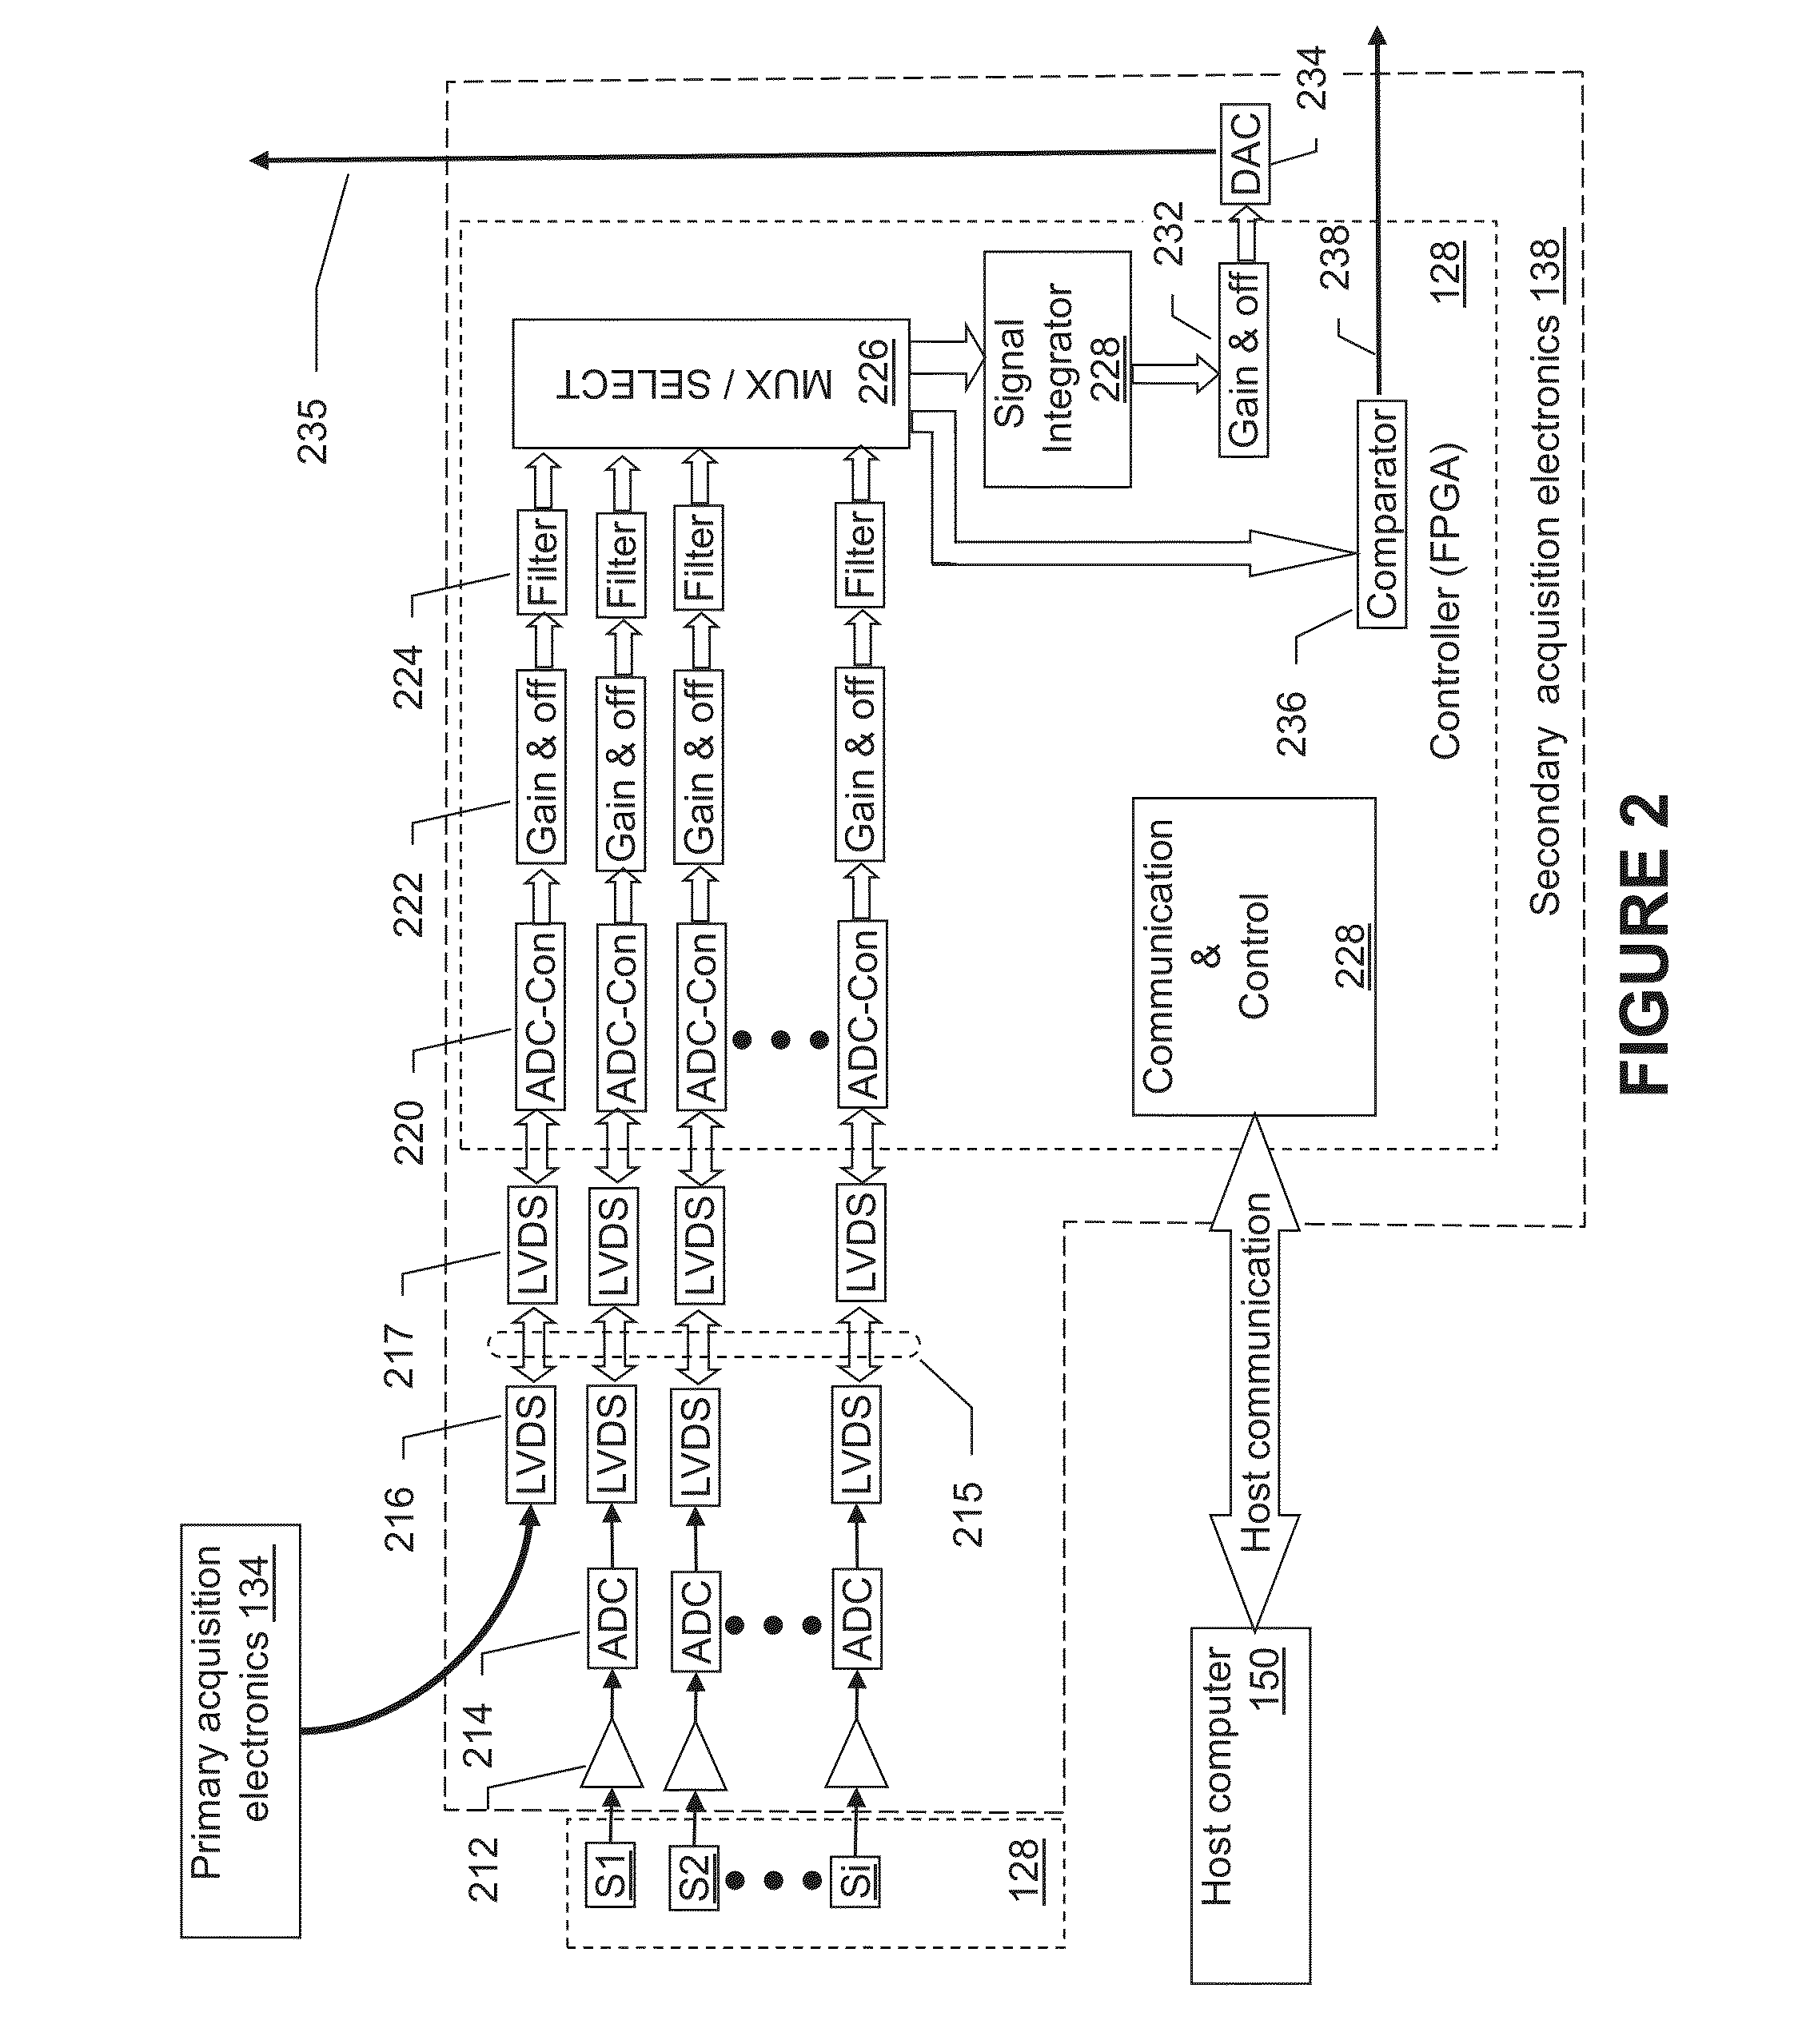 X-ray radiation detector with automatic exposure control